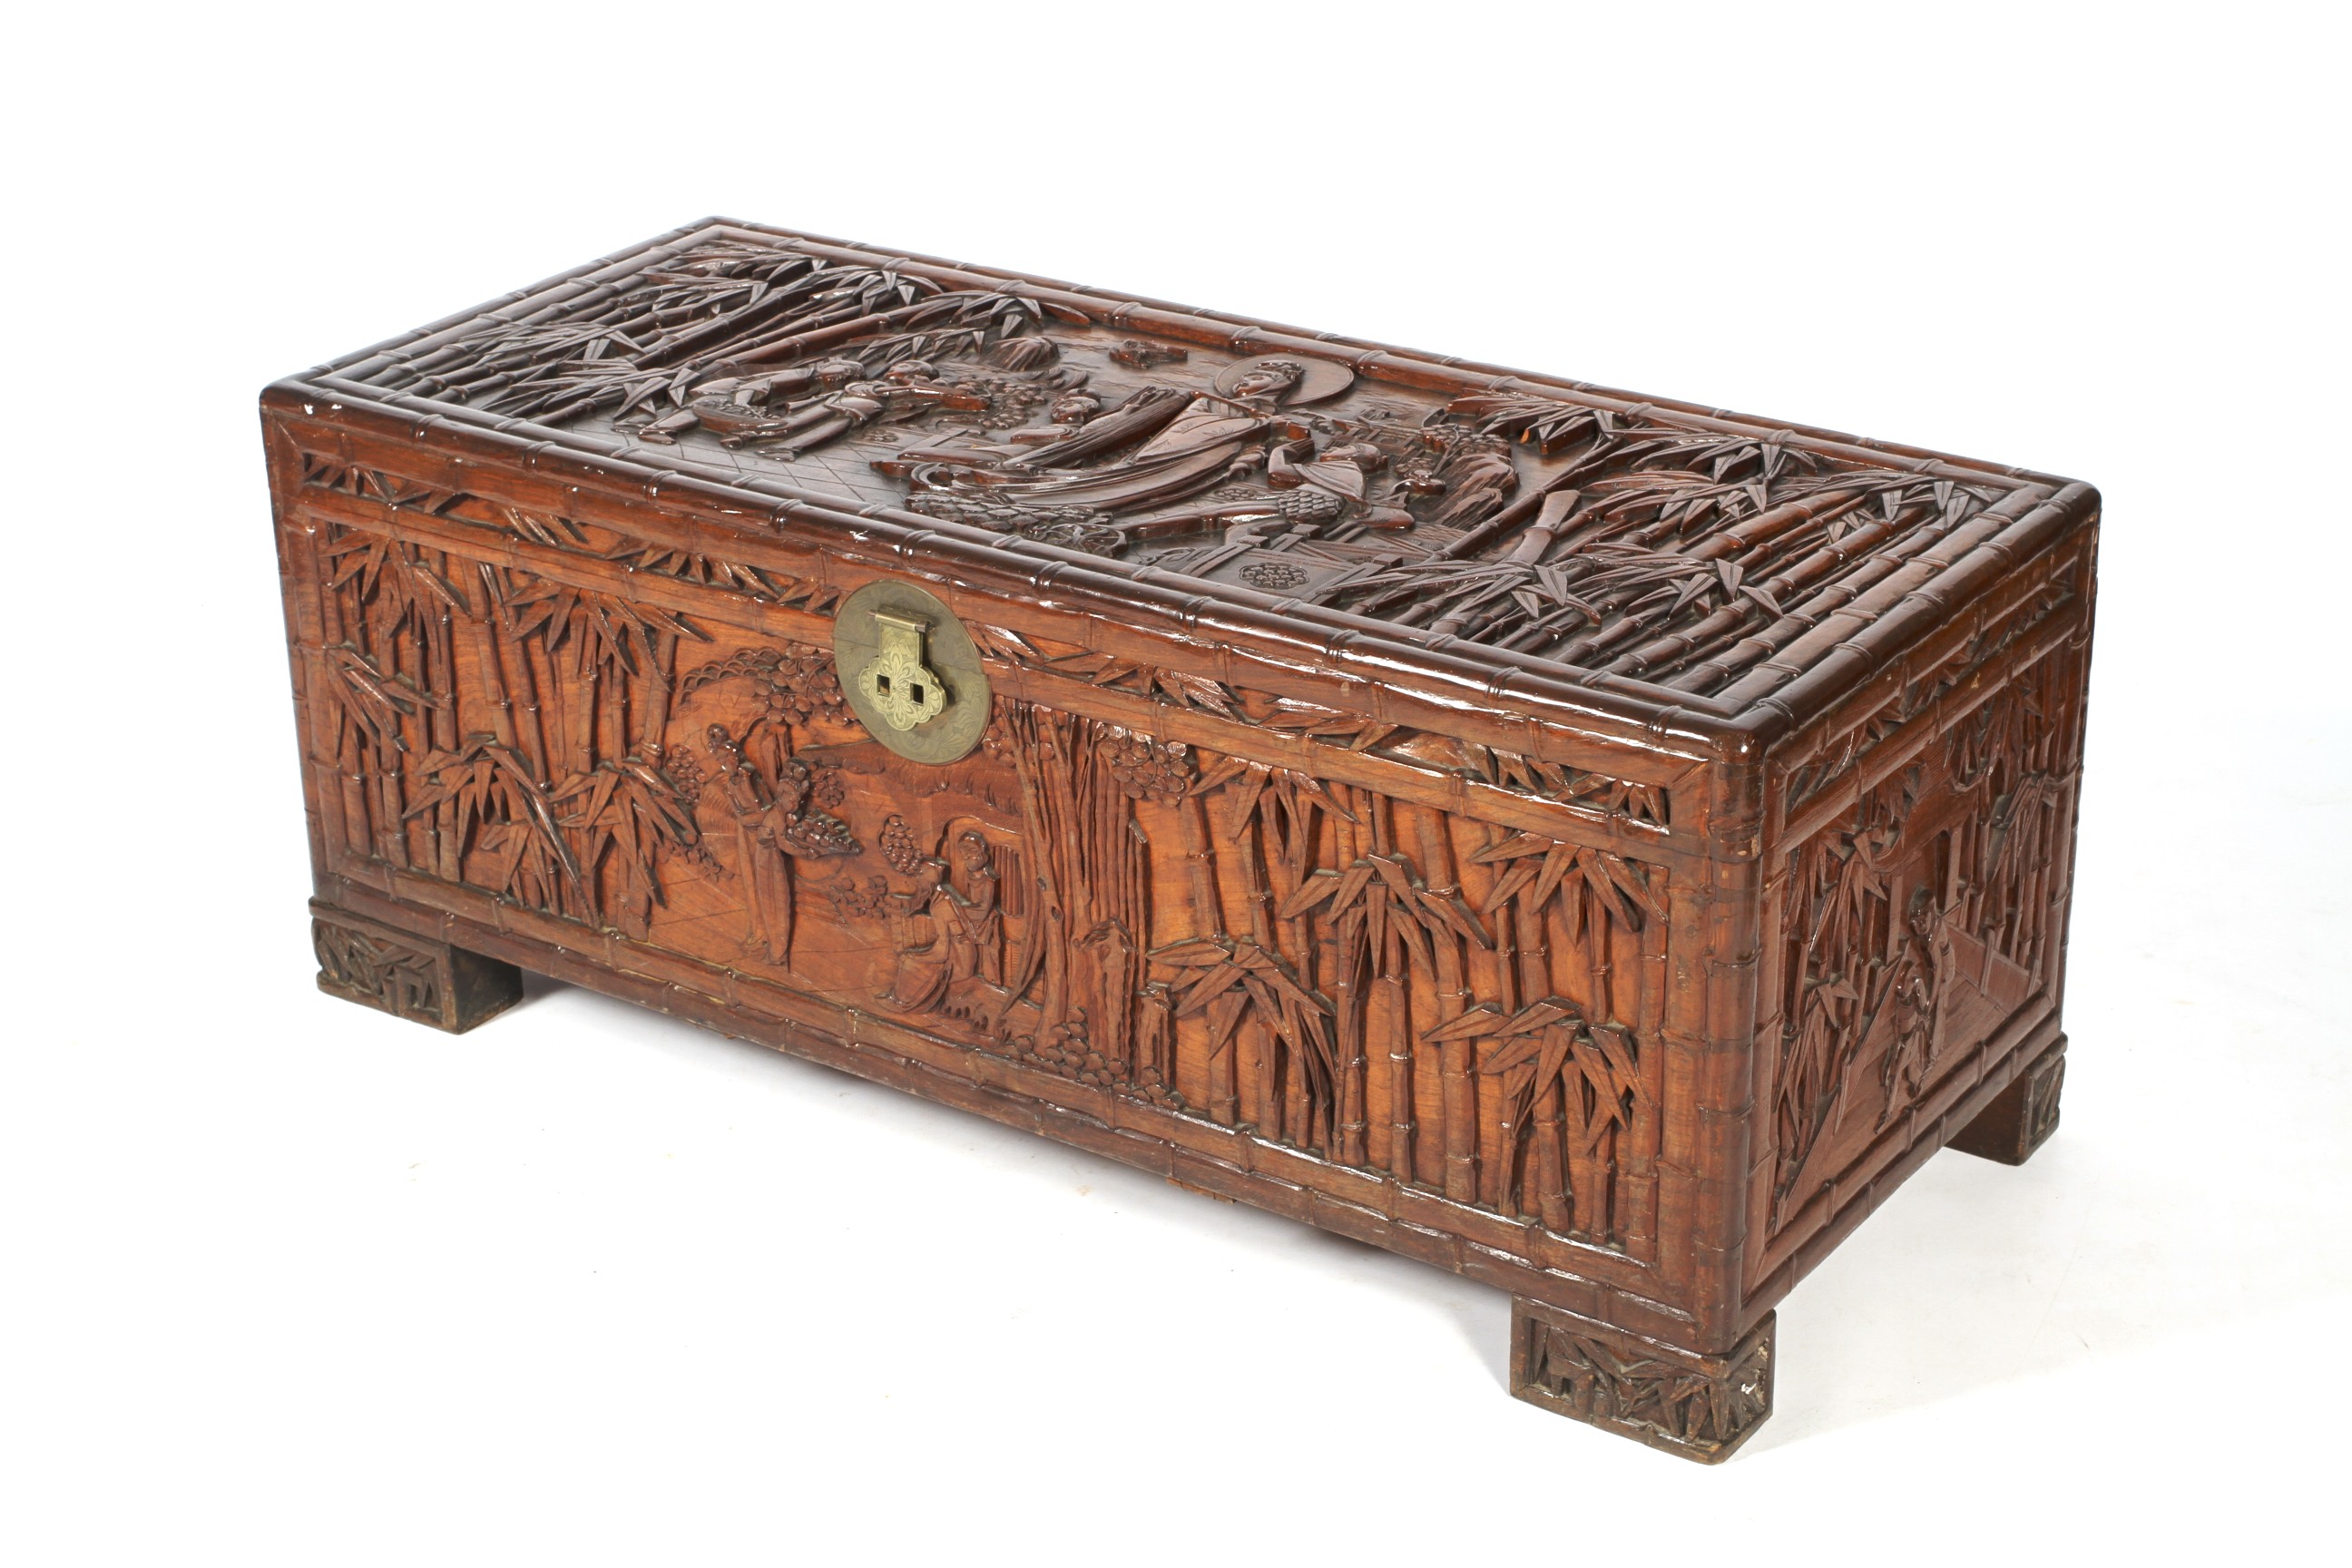 A Chinese carved camphor wood chest. Carved with figures amongst bamboo.